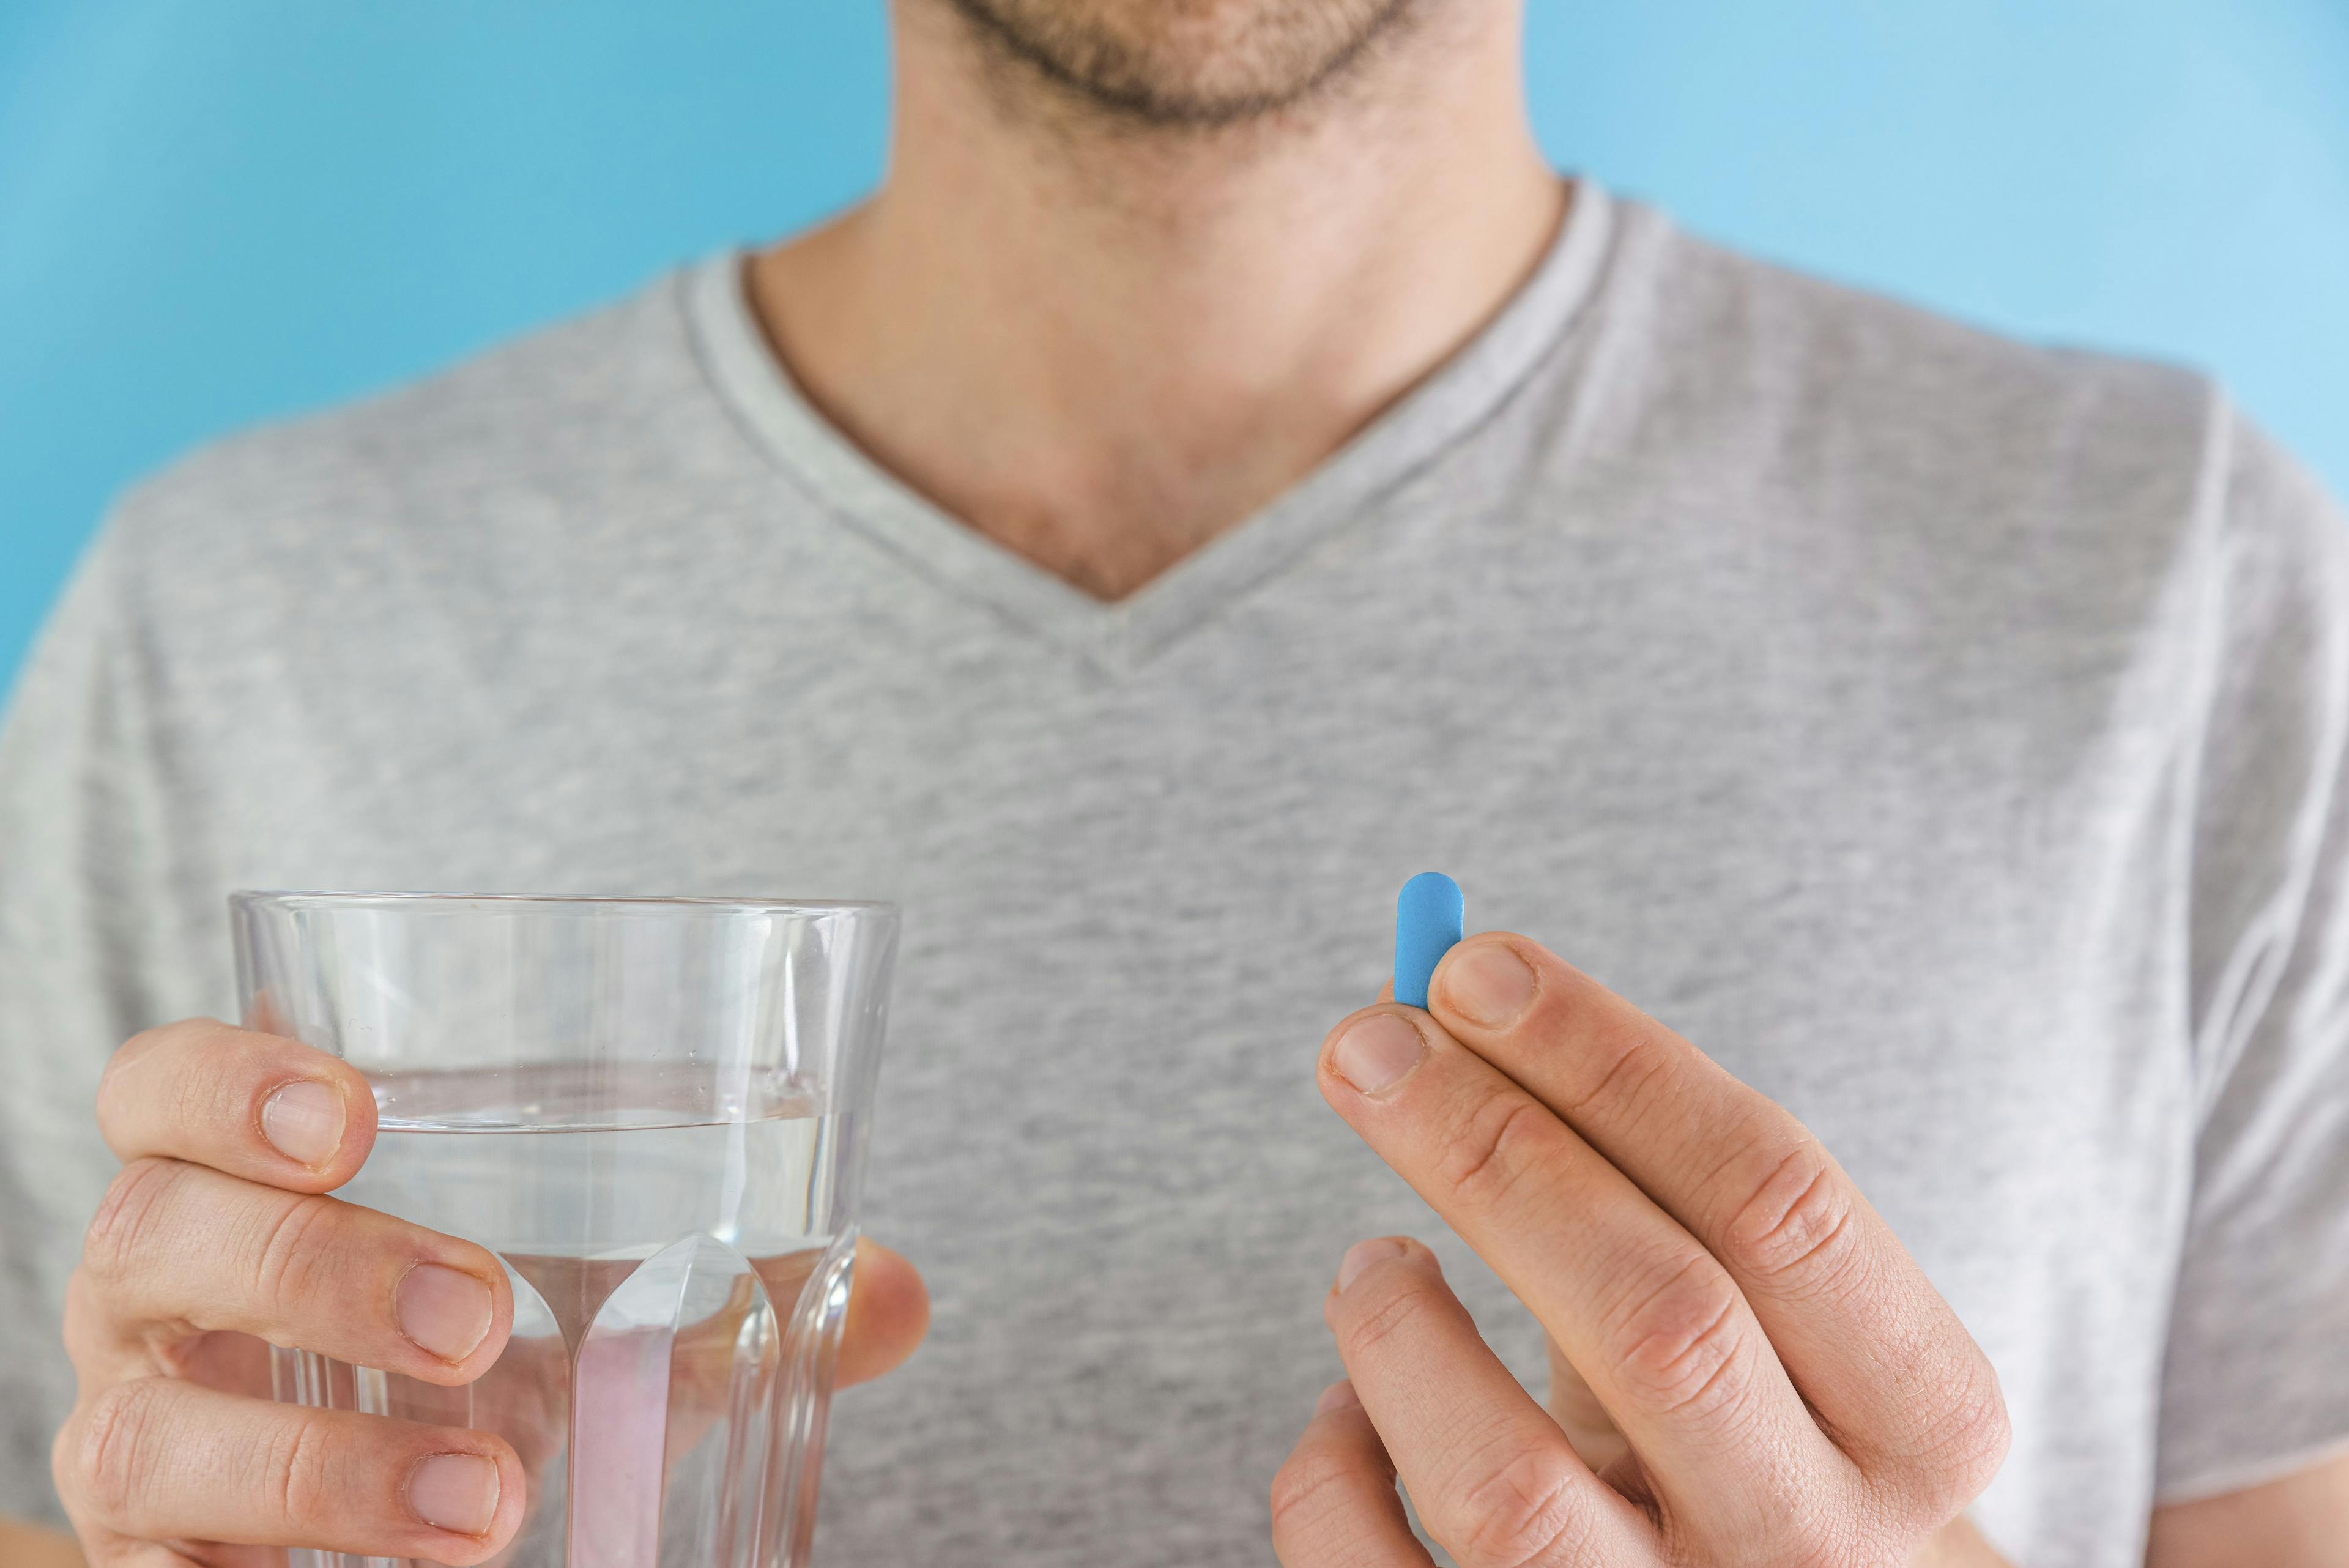 Man holding oral PrEP pill and a glass of water